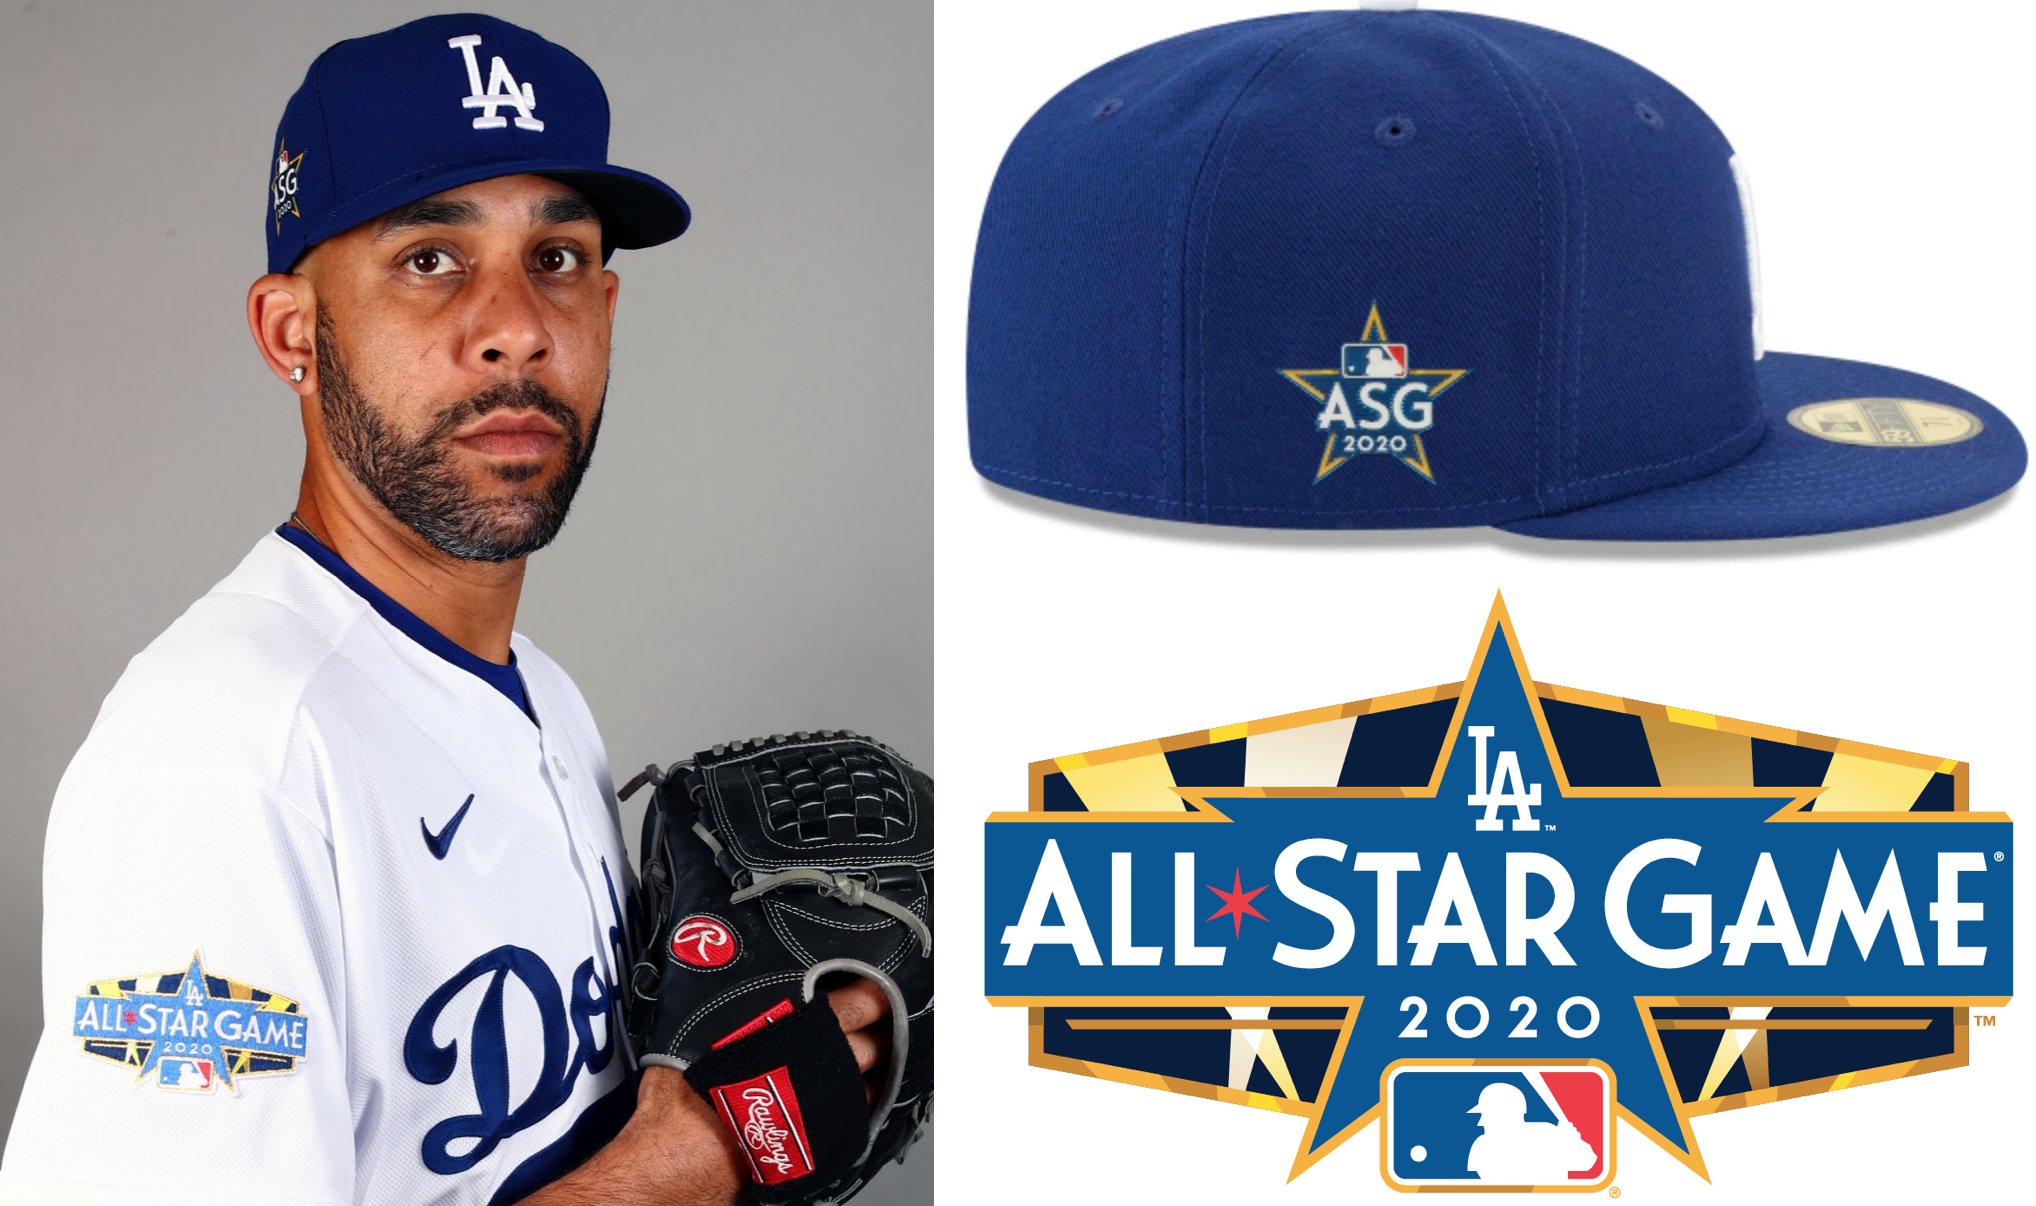 Paul Lukas on X: Good look at the All-Star Game patches that this